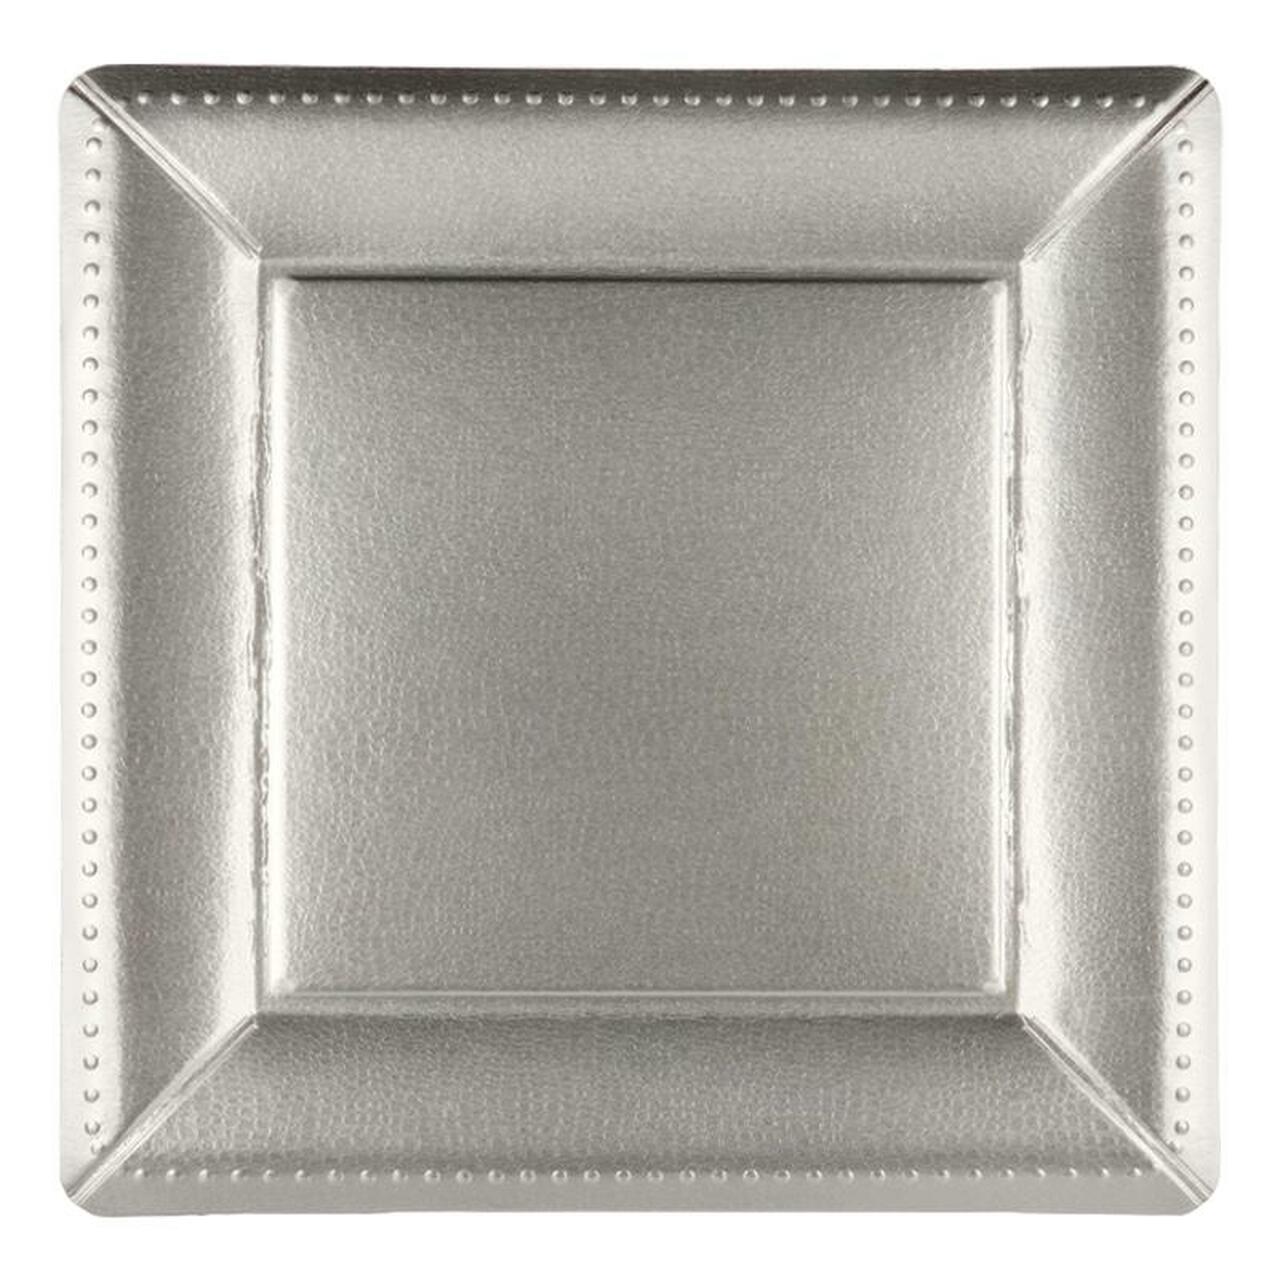 13" Silver Square Edge Beaded Disposable Paper Charger Plates (10 Count) - Set With Style